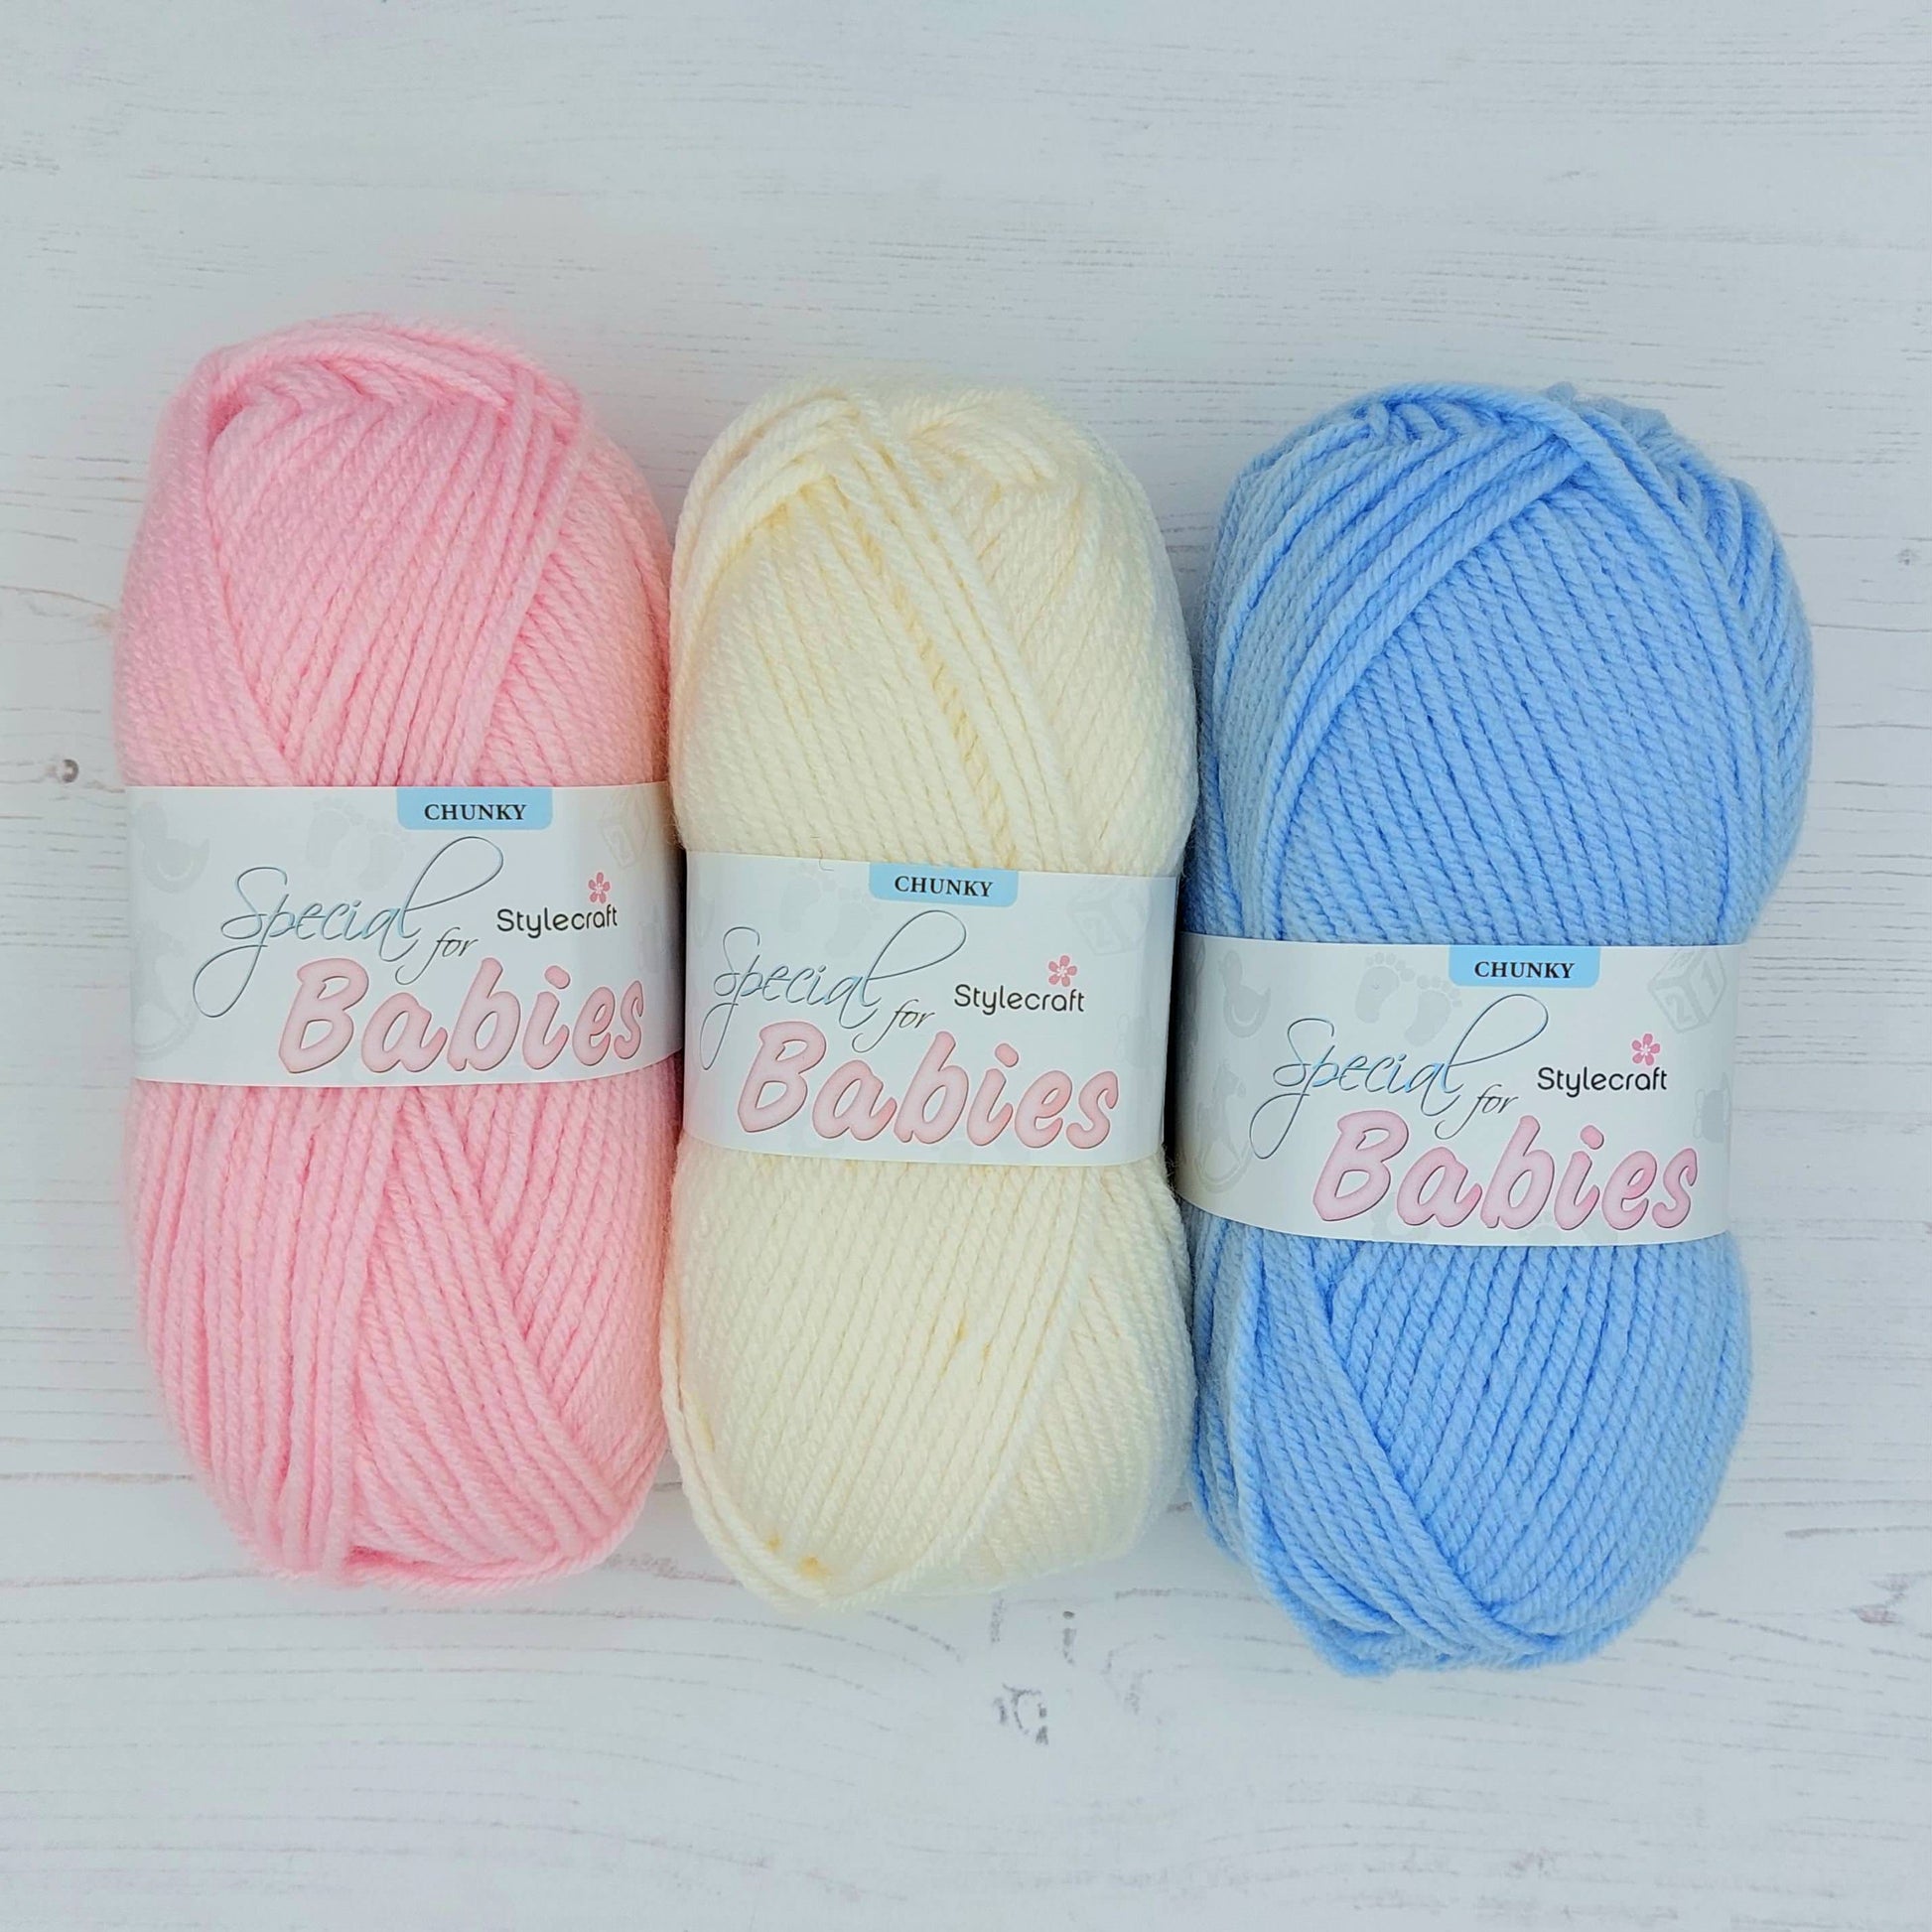 Balls of wool - pink, cream and blue